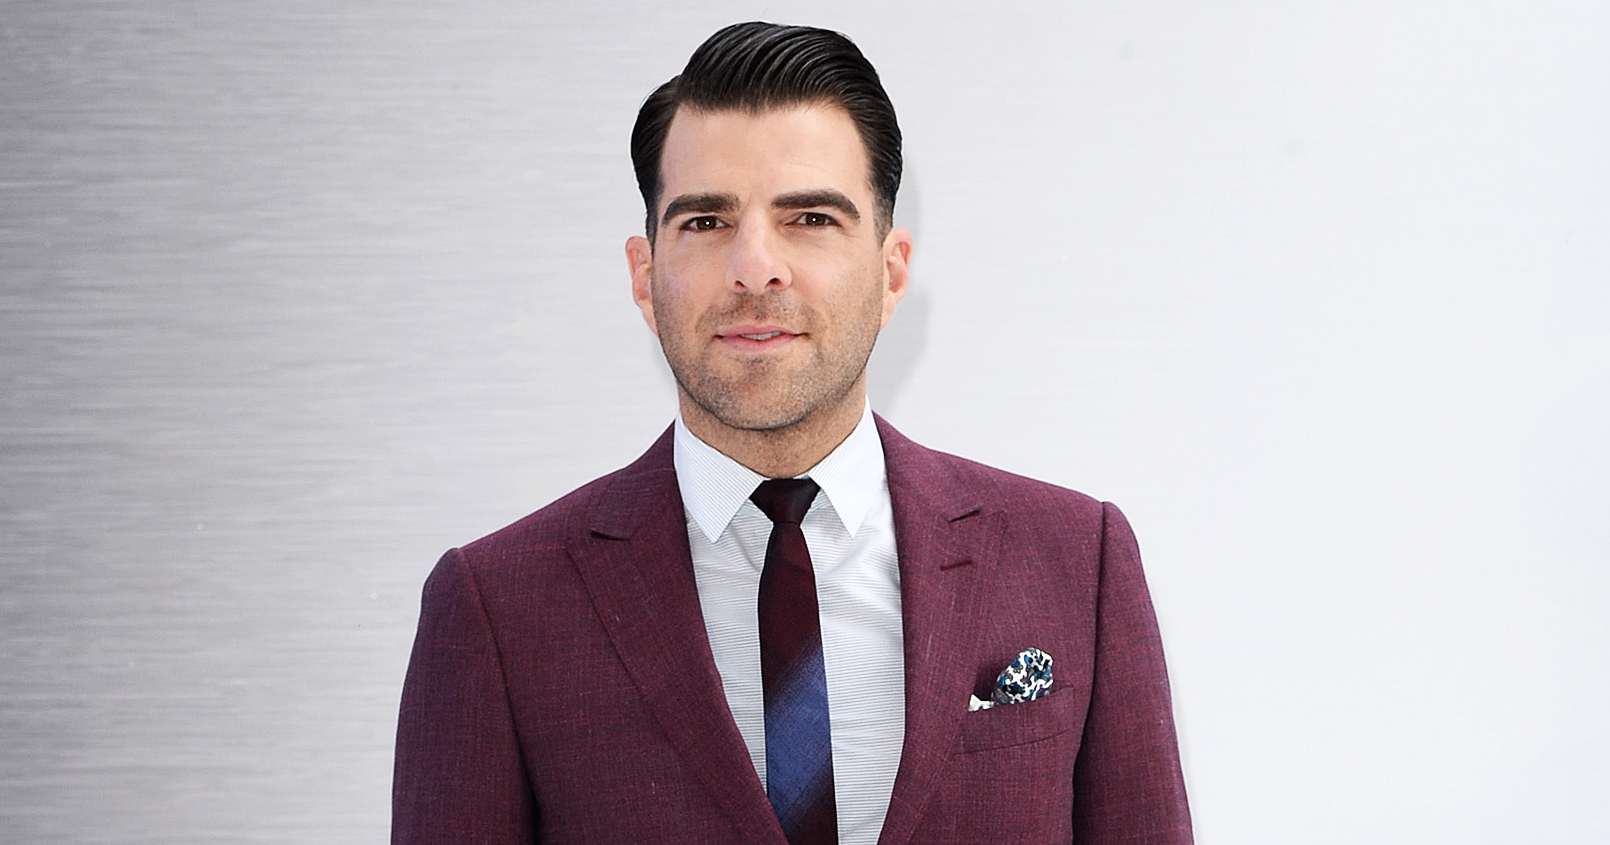 Zachary Quinto Interview: Thoughts on Star Trek and LGBT | Time.com